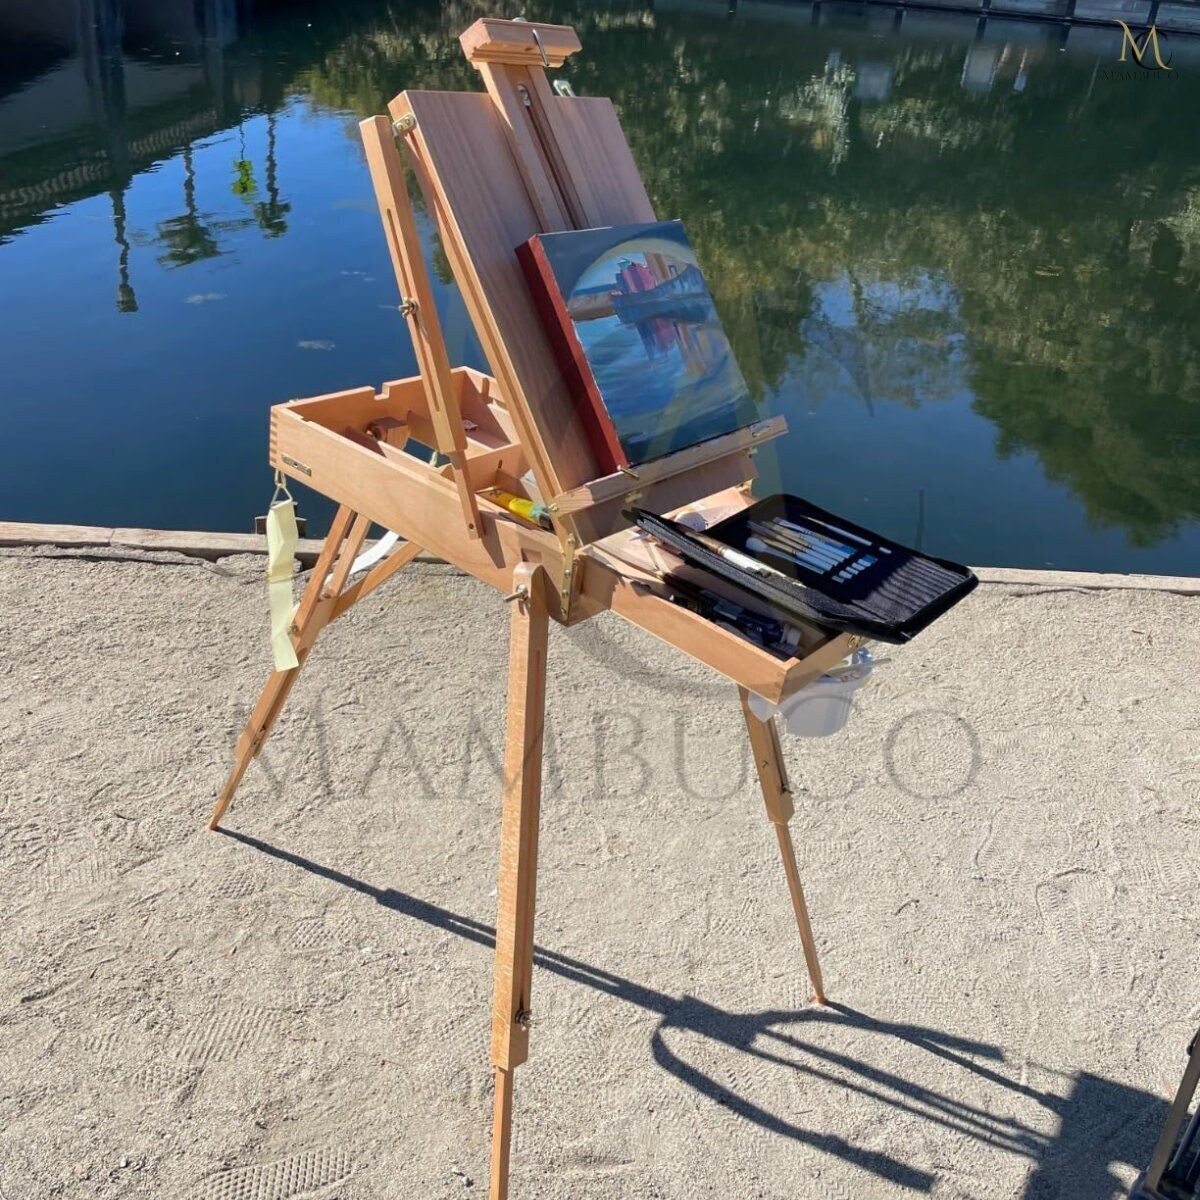 The Revolution Easel Rotating Artist Easel Two-arm Conversion Kit. 